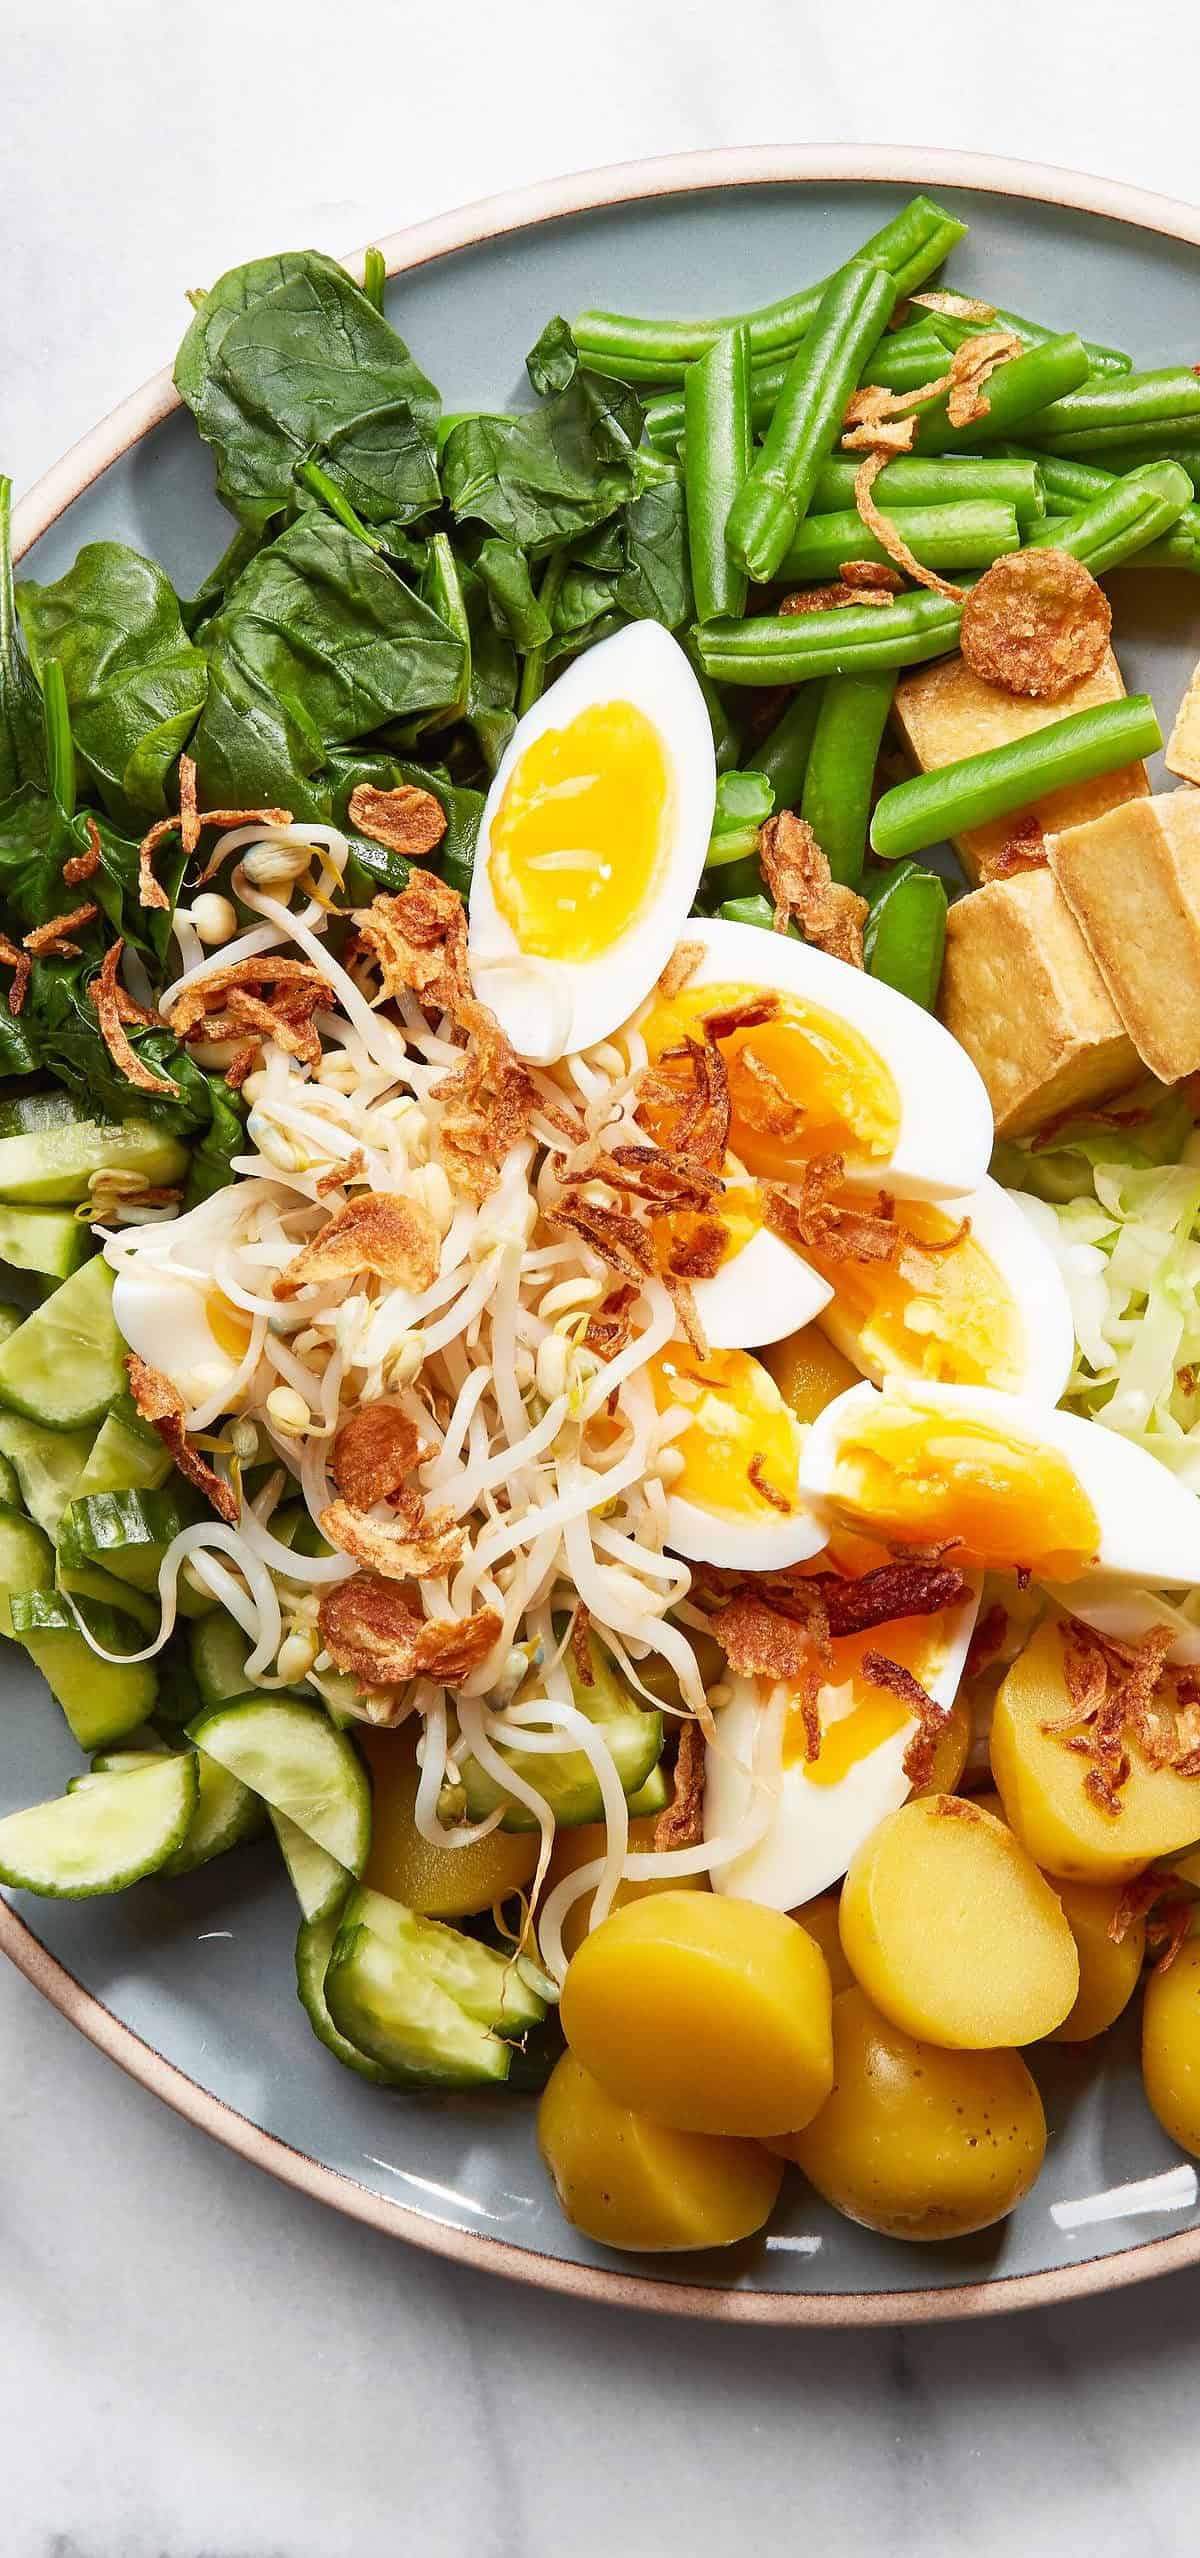  Ready to dive into this colorful and nutritious Malaysian-style salad?